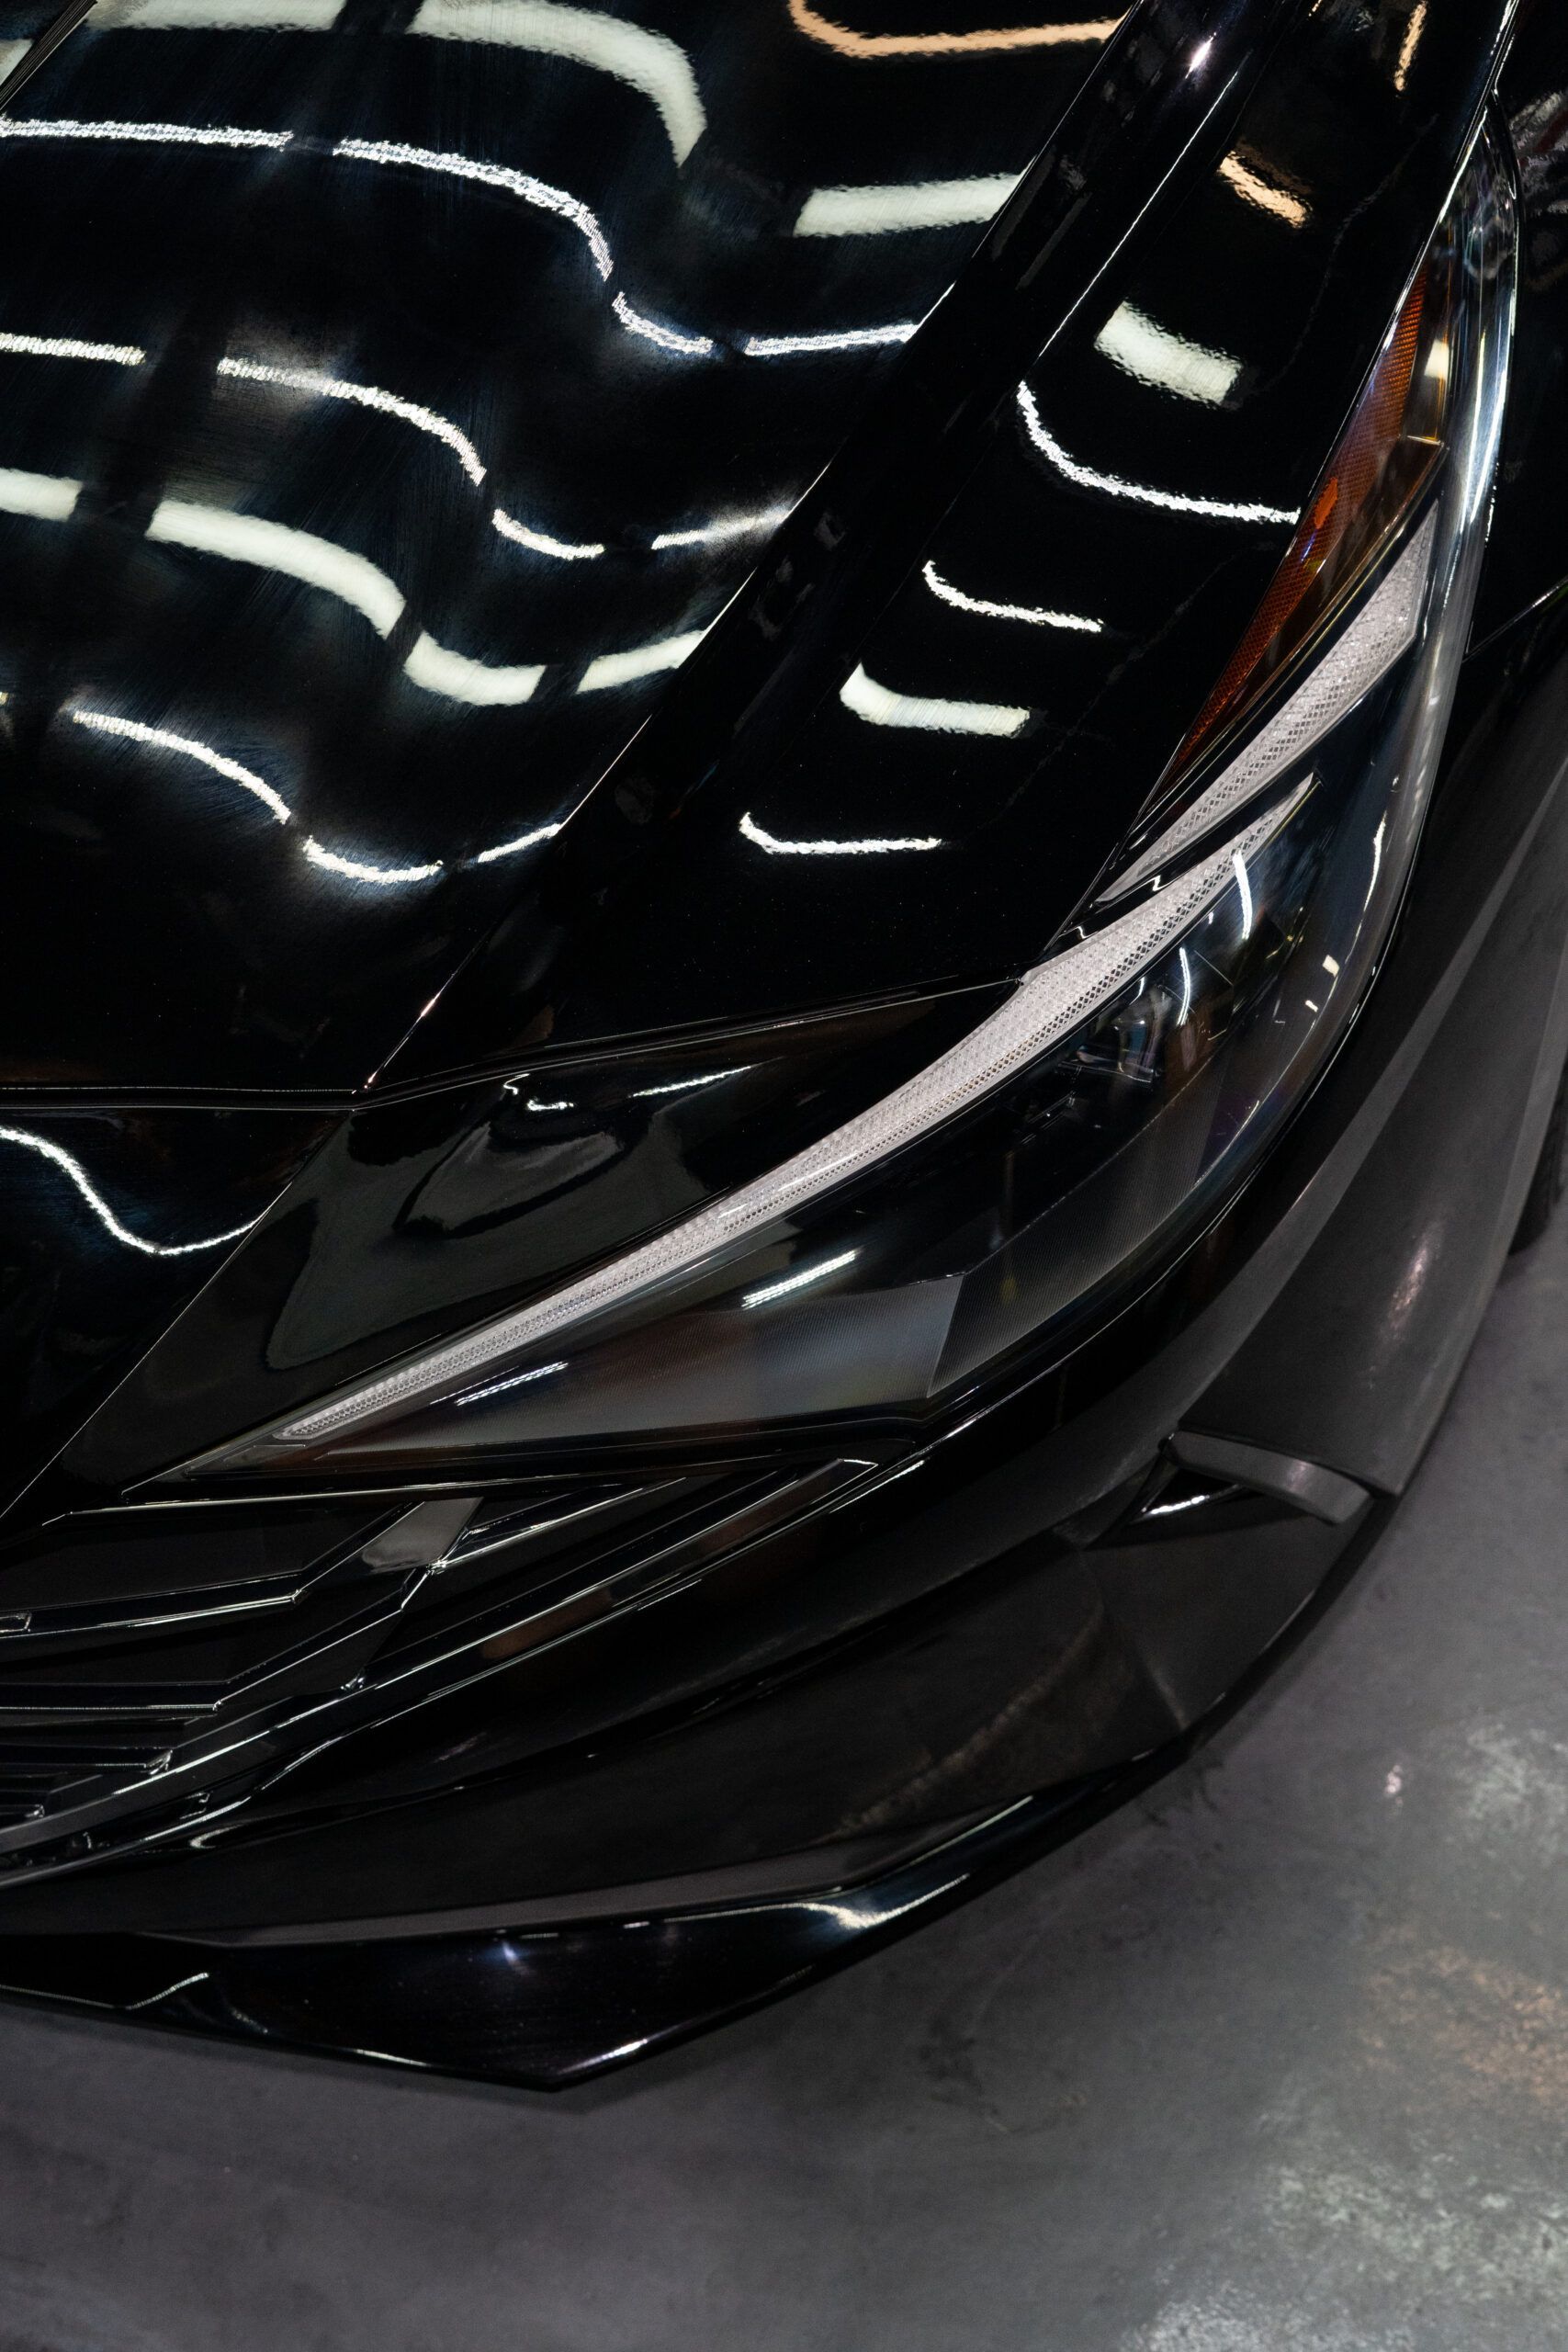 A close up of a black car 's headlight and hood